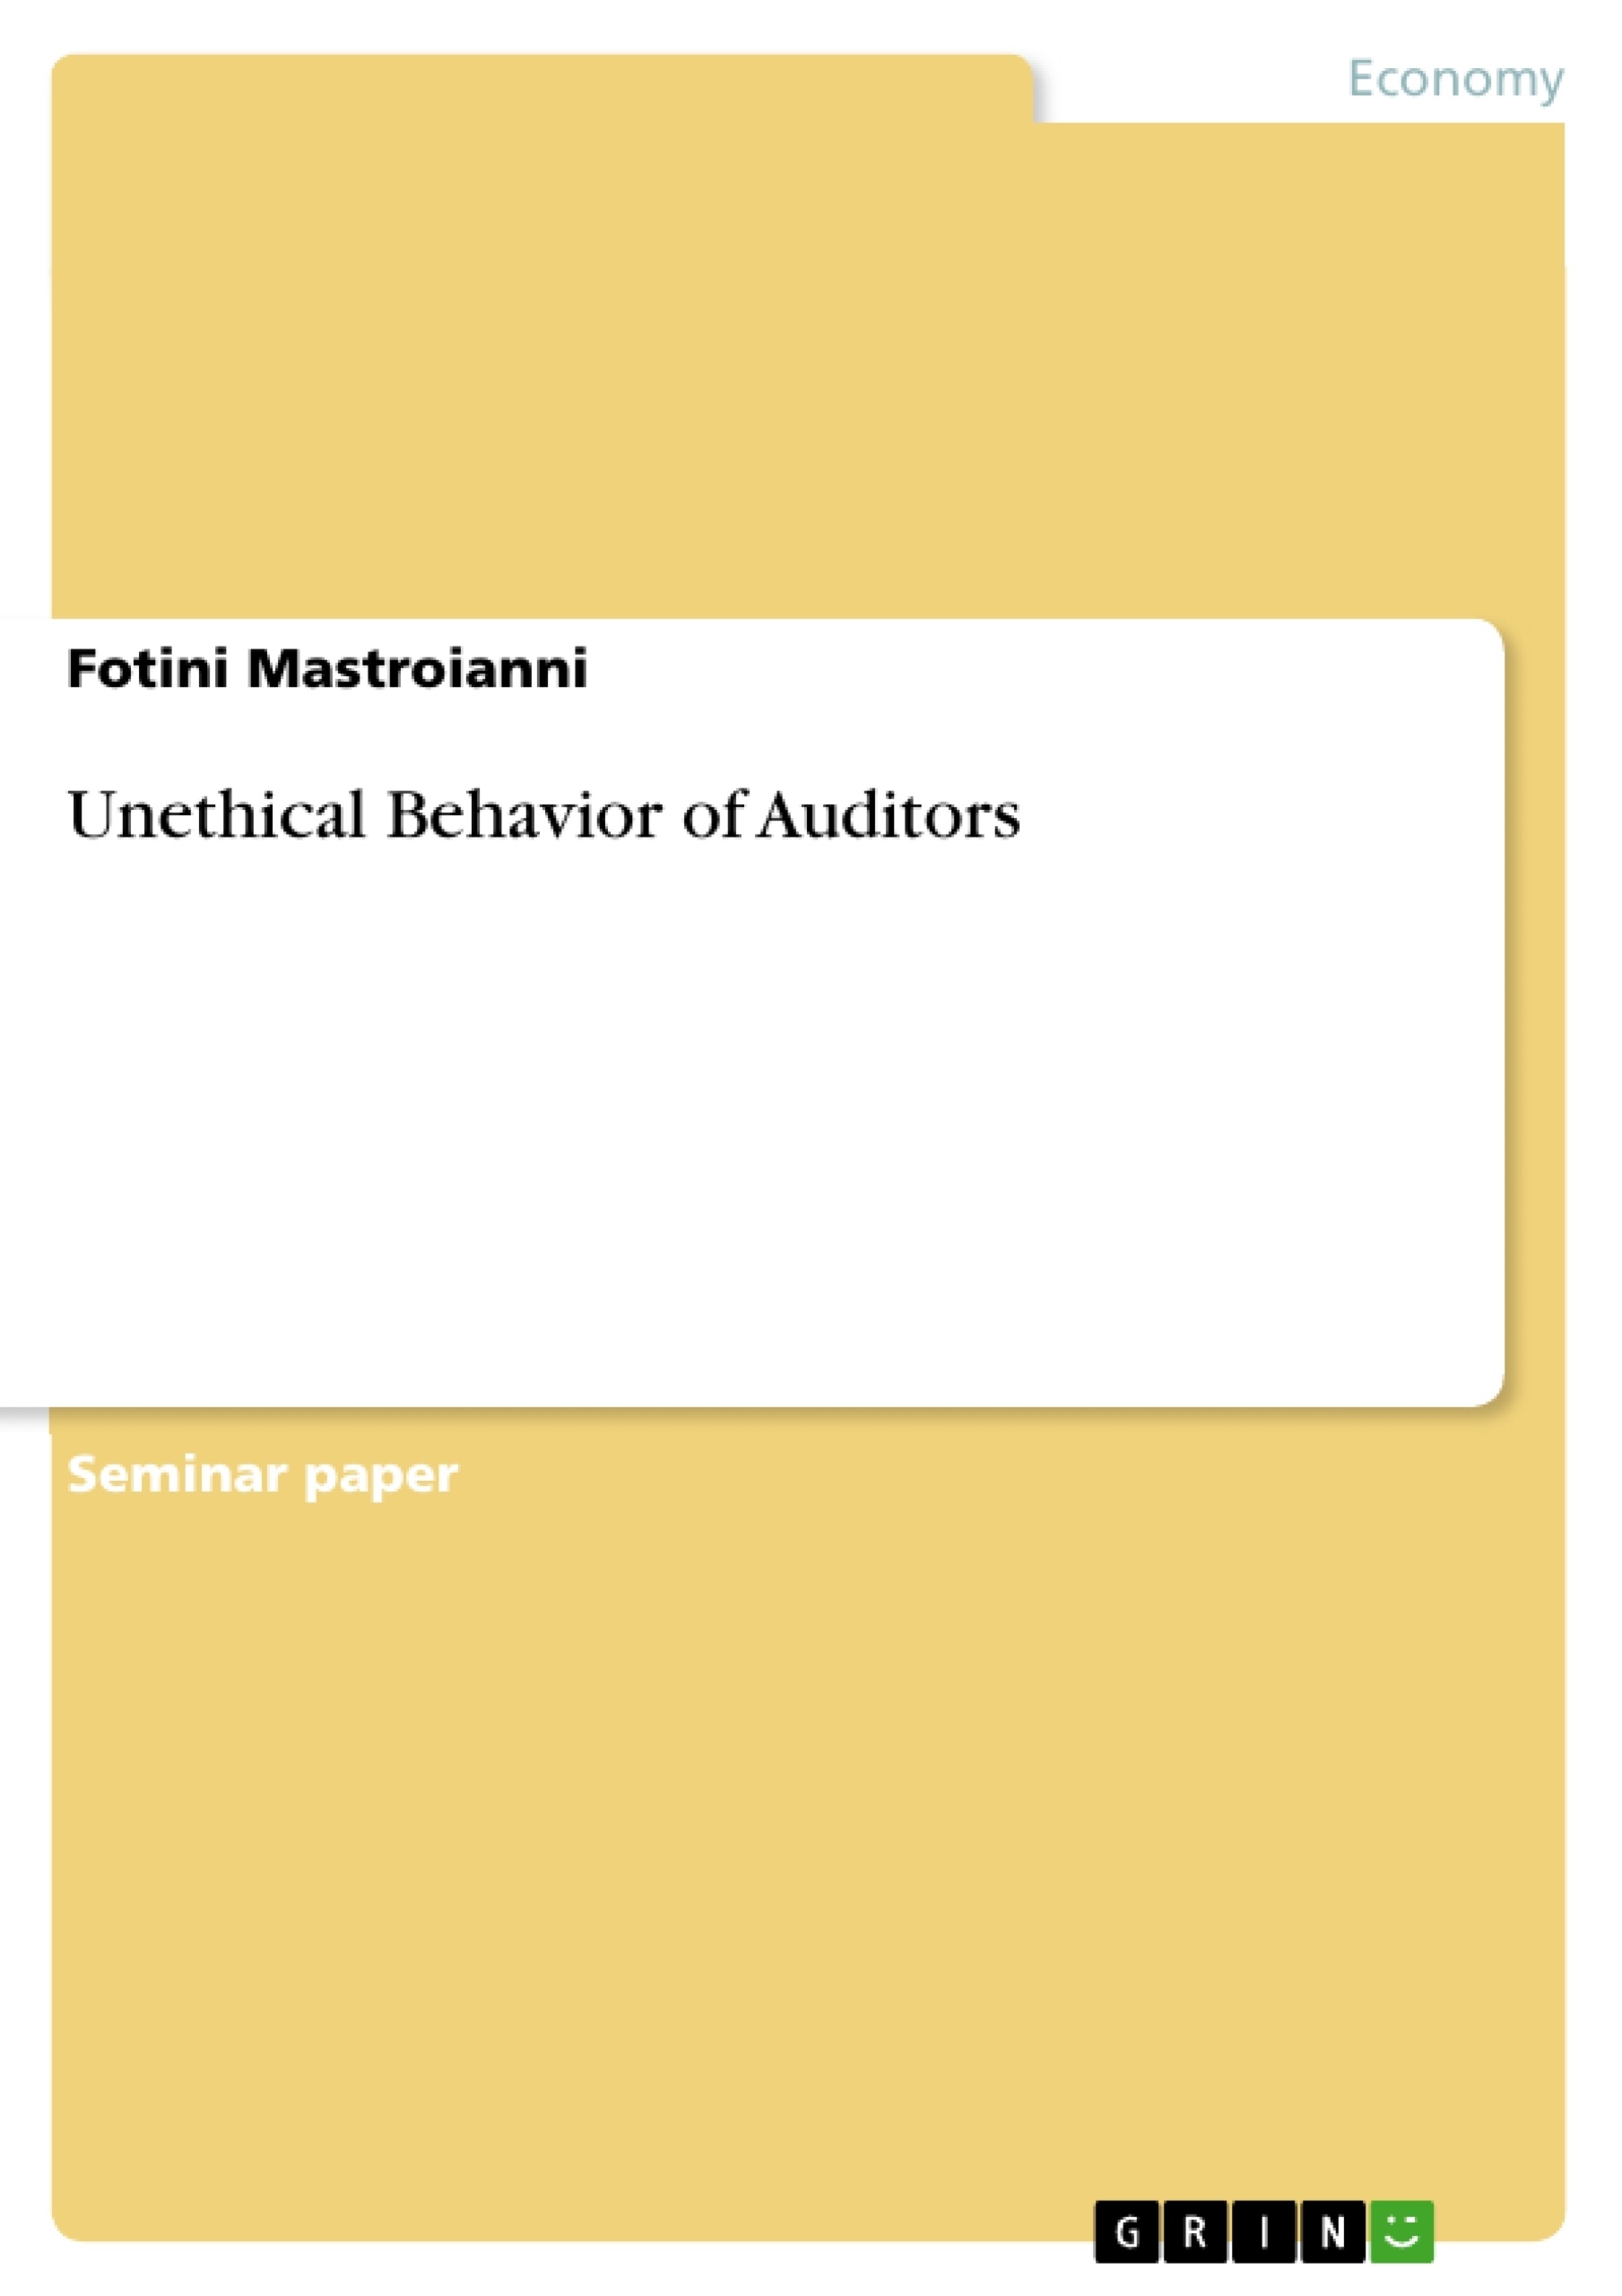 Título: Unethical Behavior of Auditors